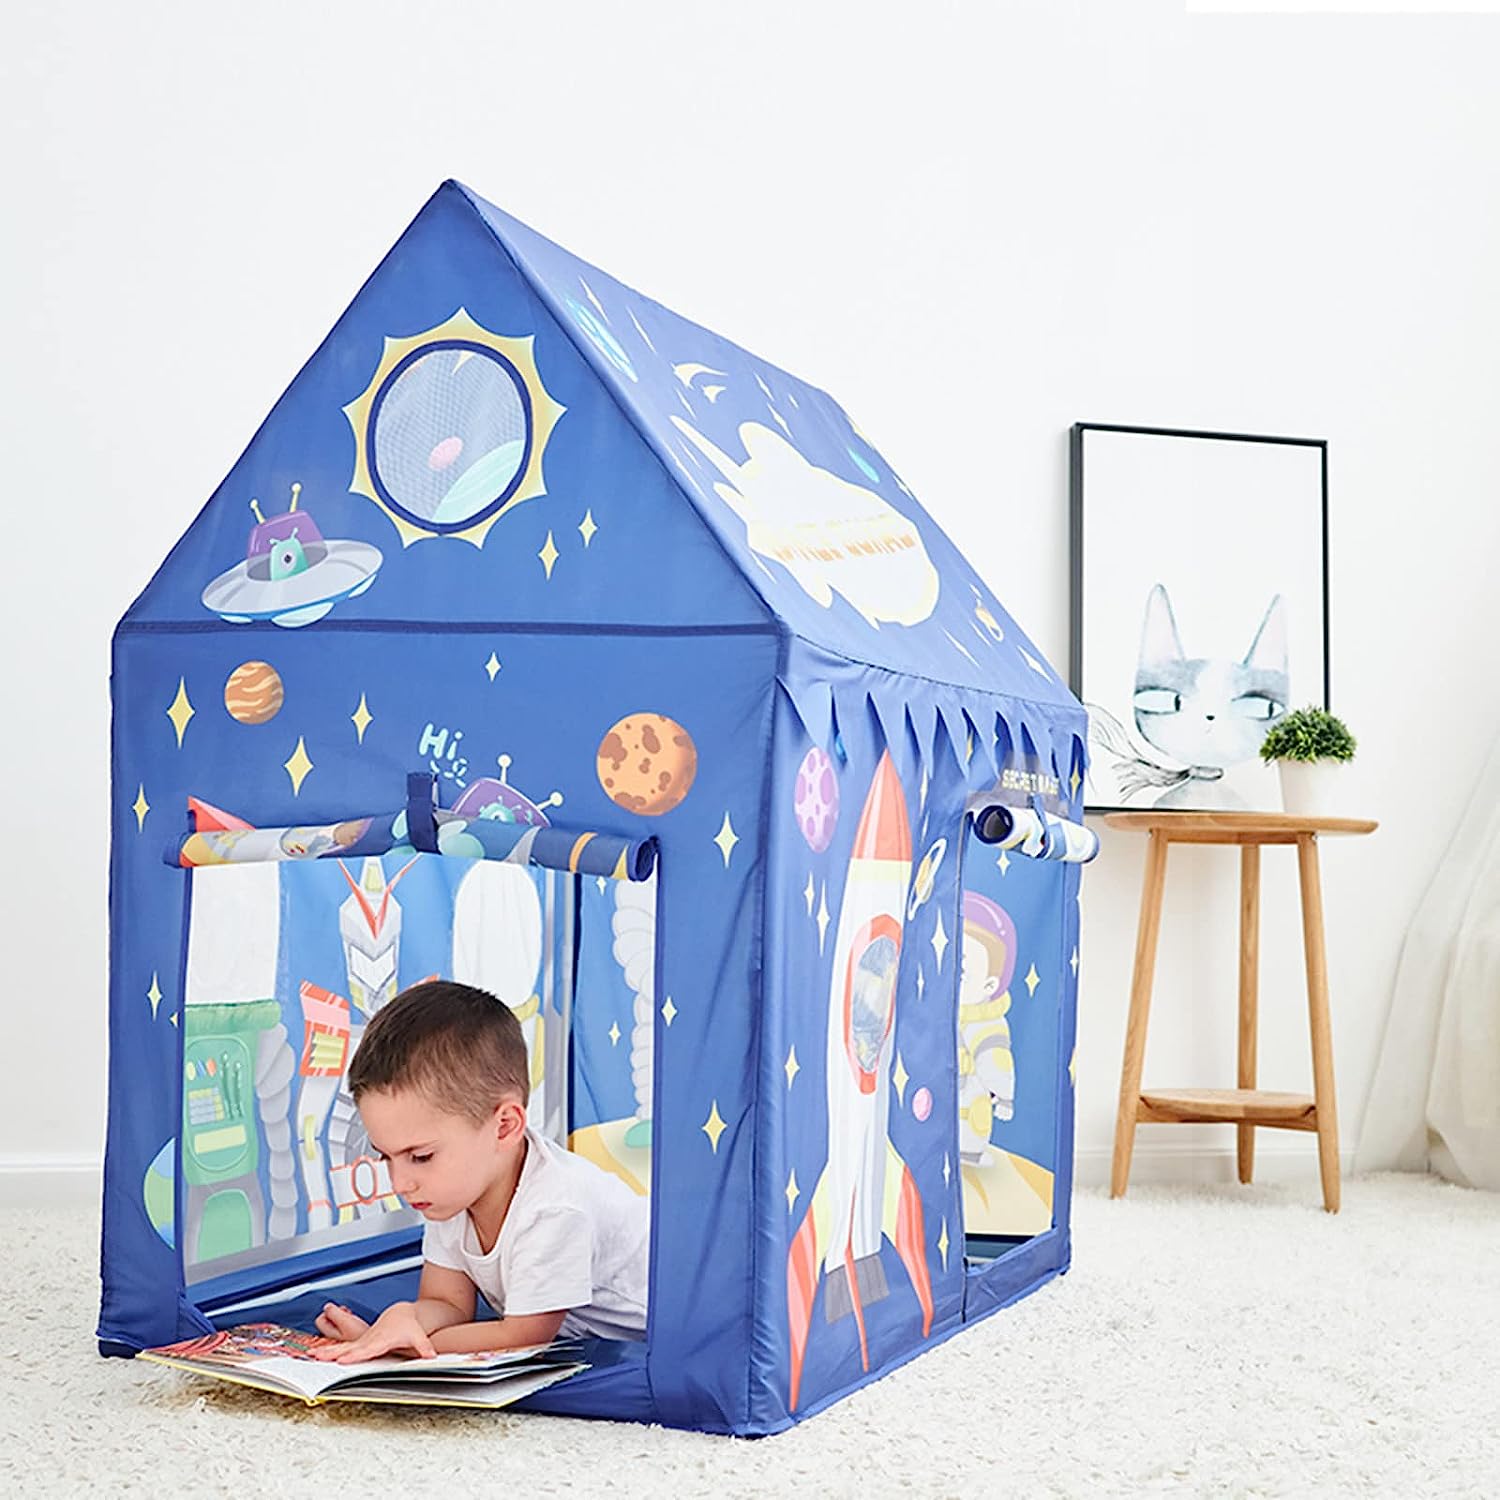 Kids Wendy House Astronaut Play Tent